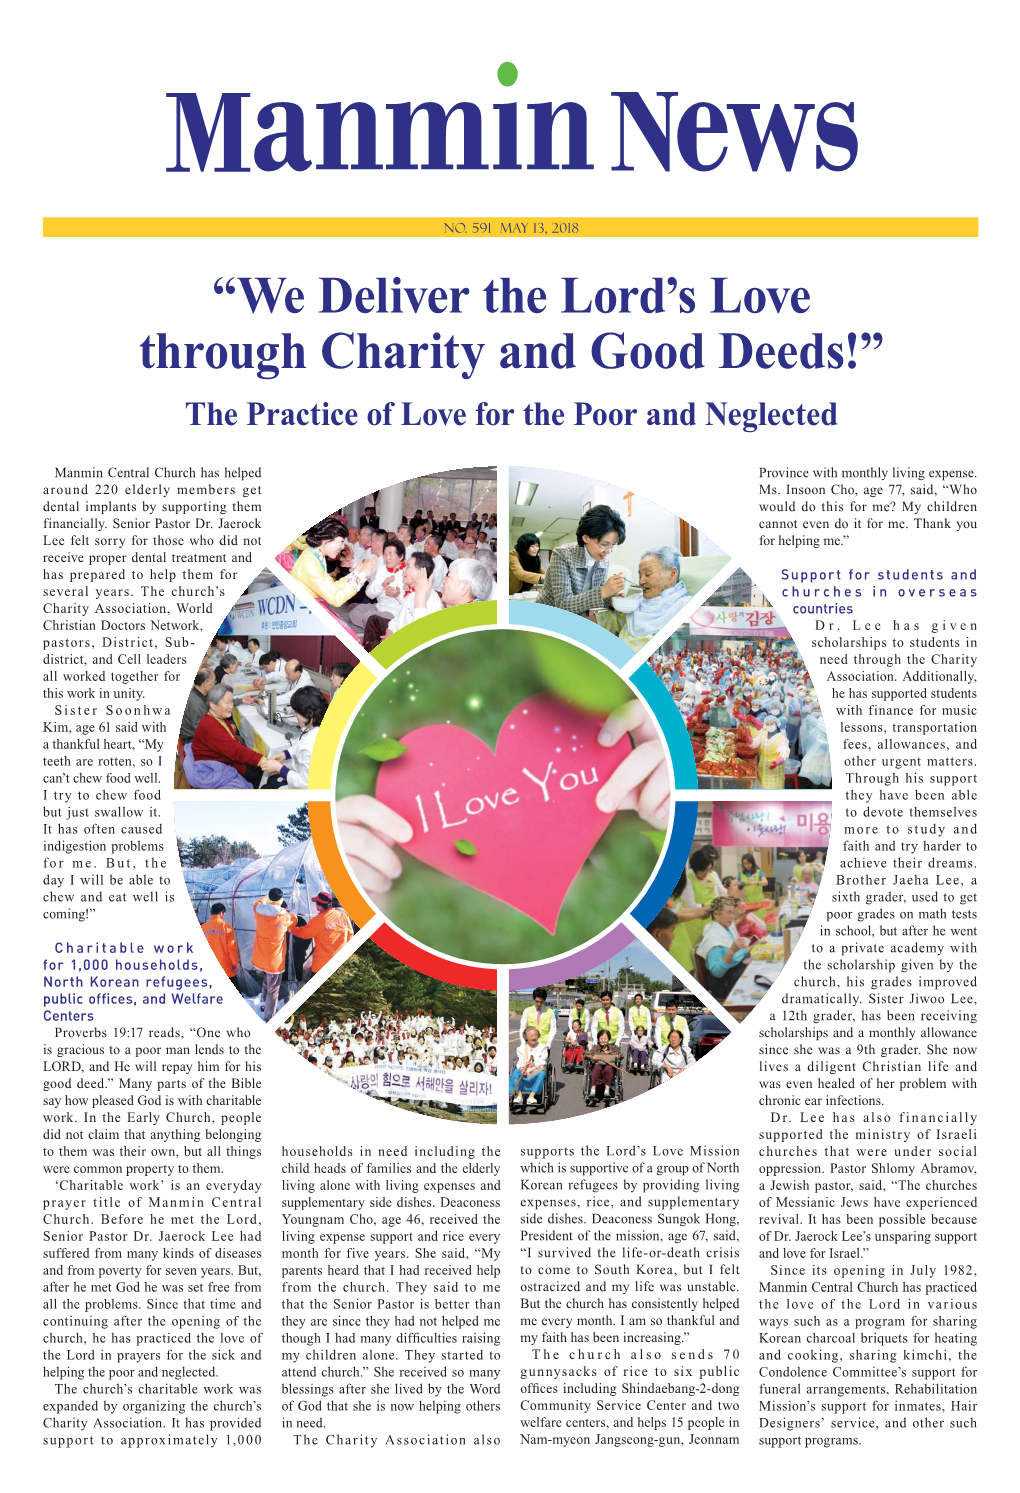 “We Deliver the Lord's Love Through Charity and Good Deeds!”